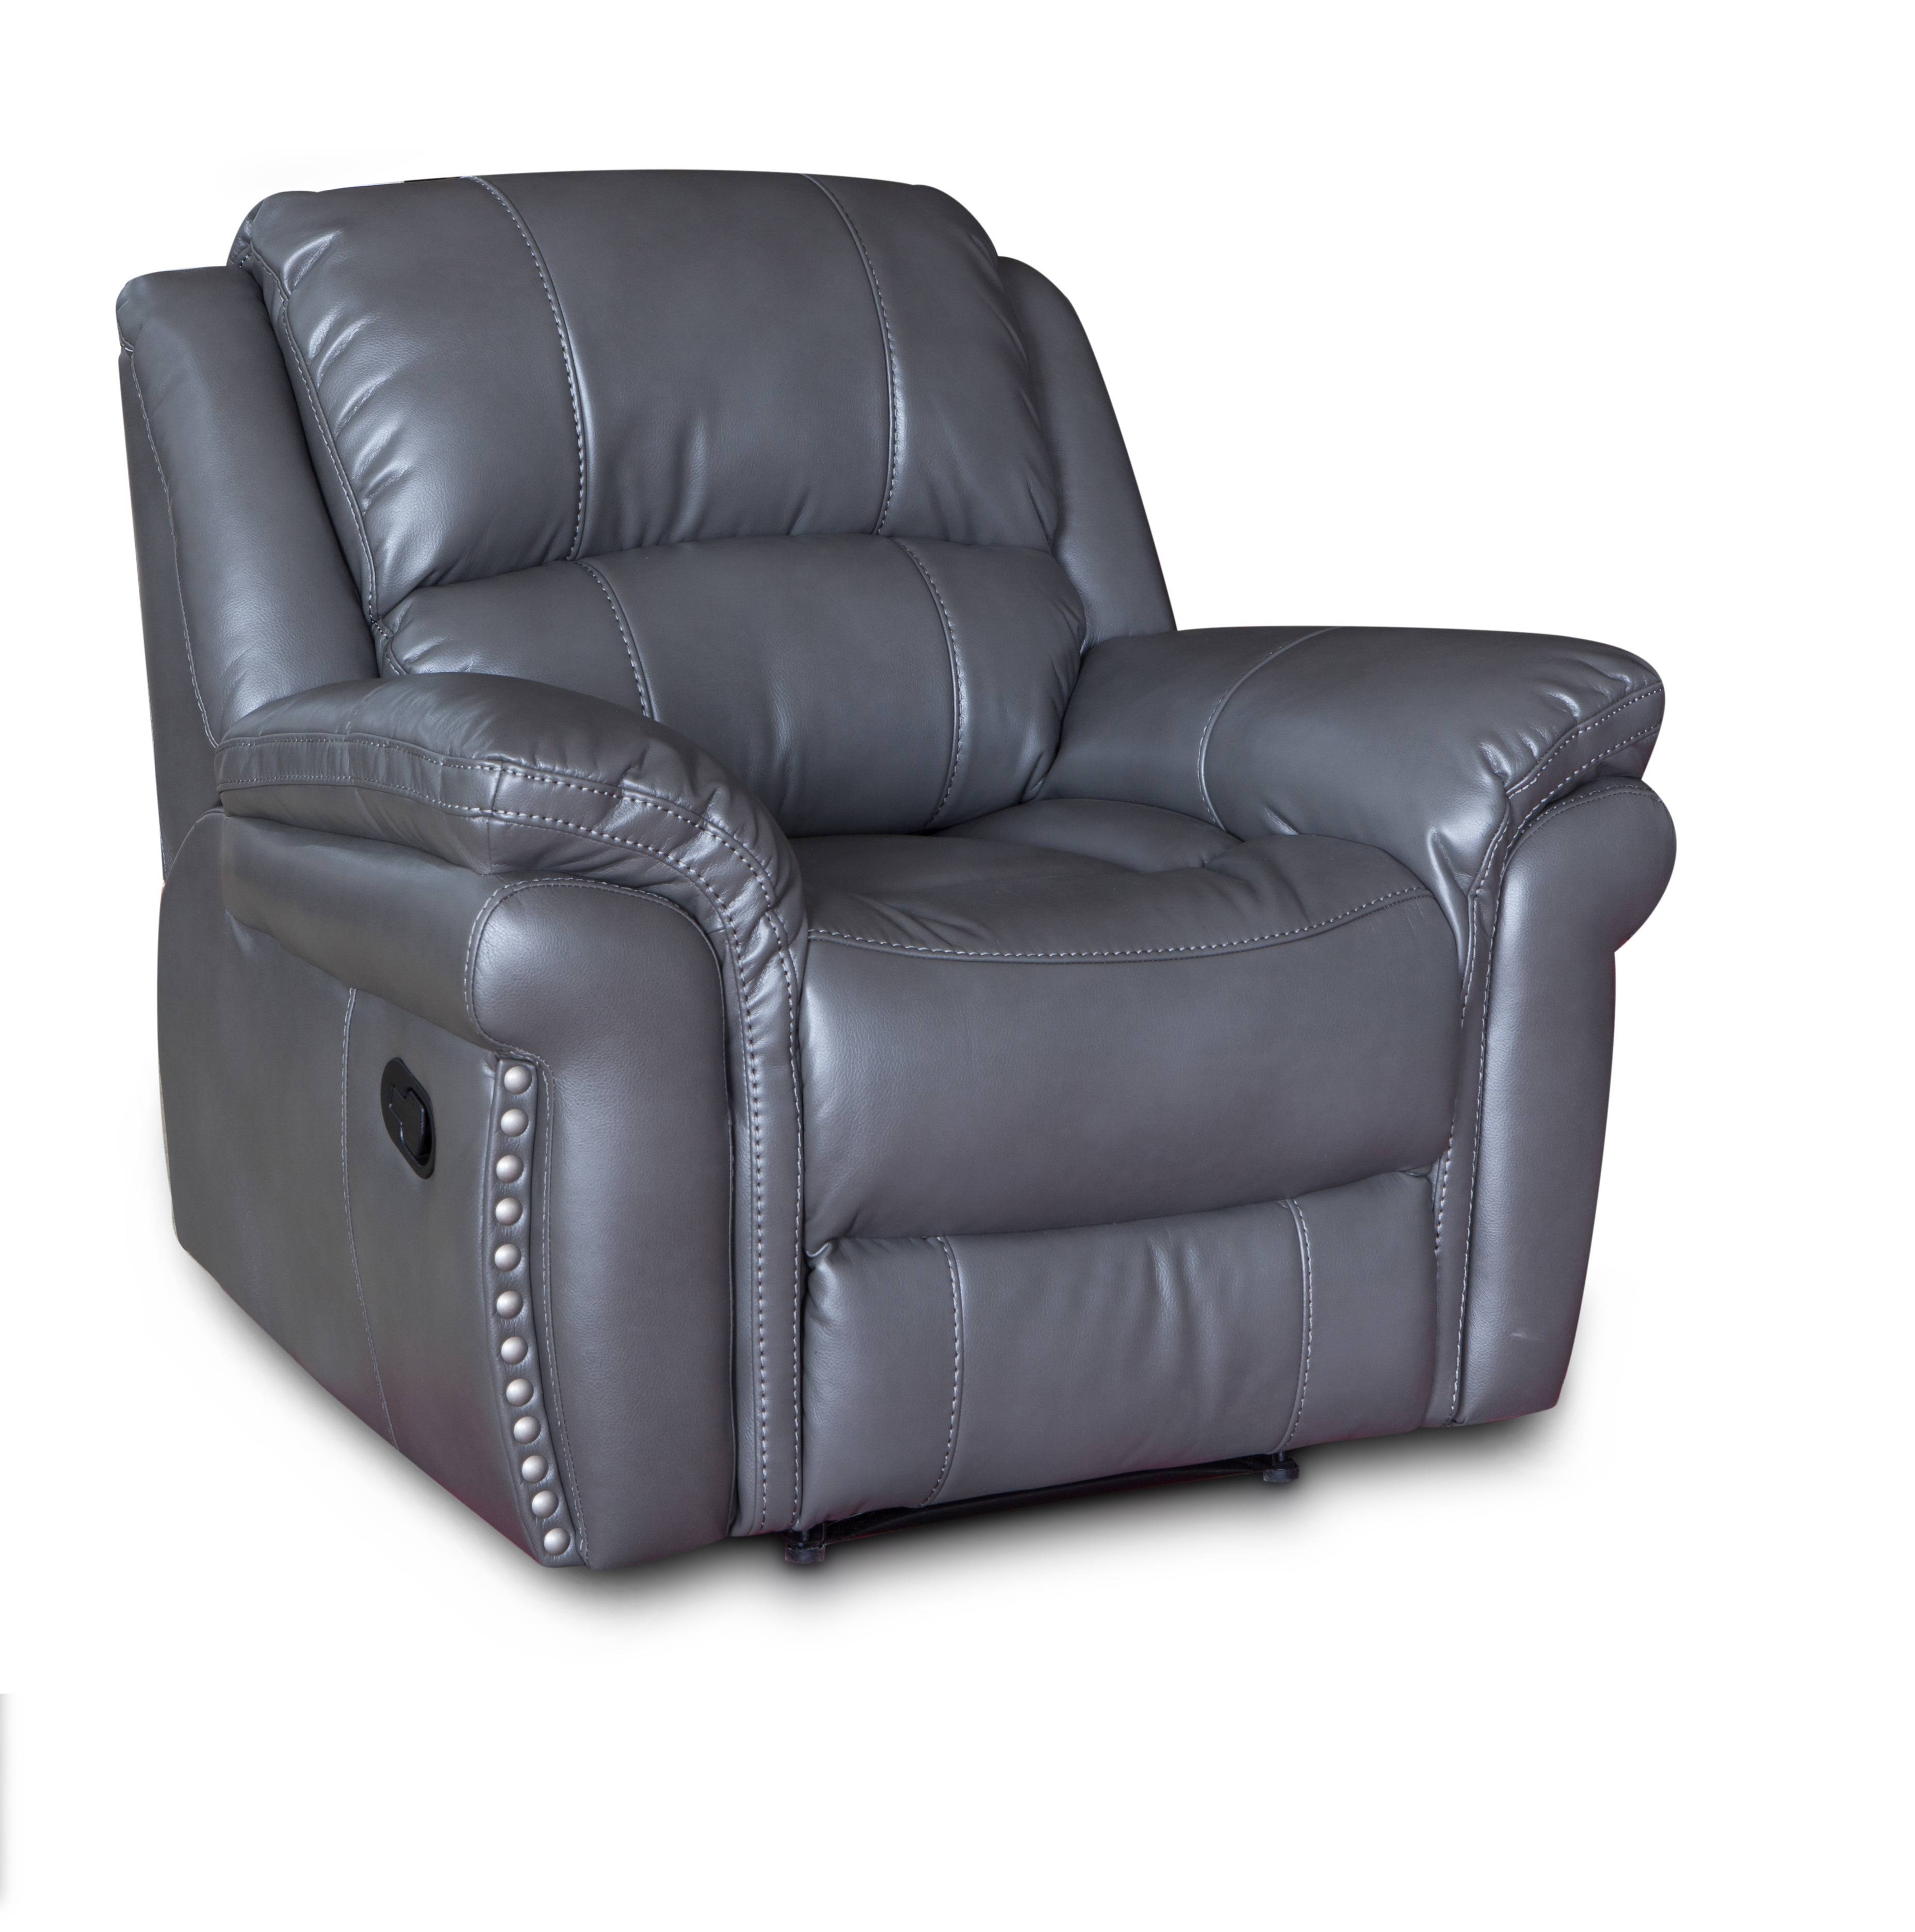 Modern American Style Furniture Rocker Functional Leather Recliner Sofa